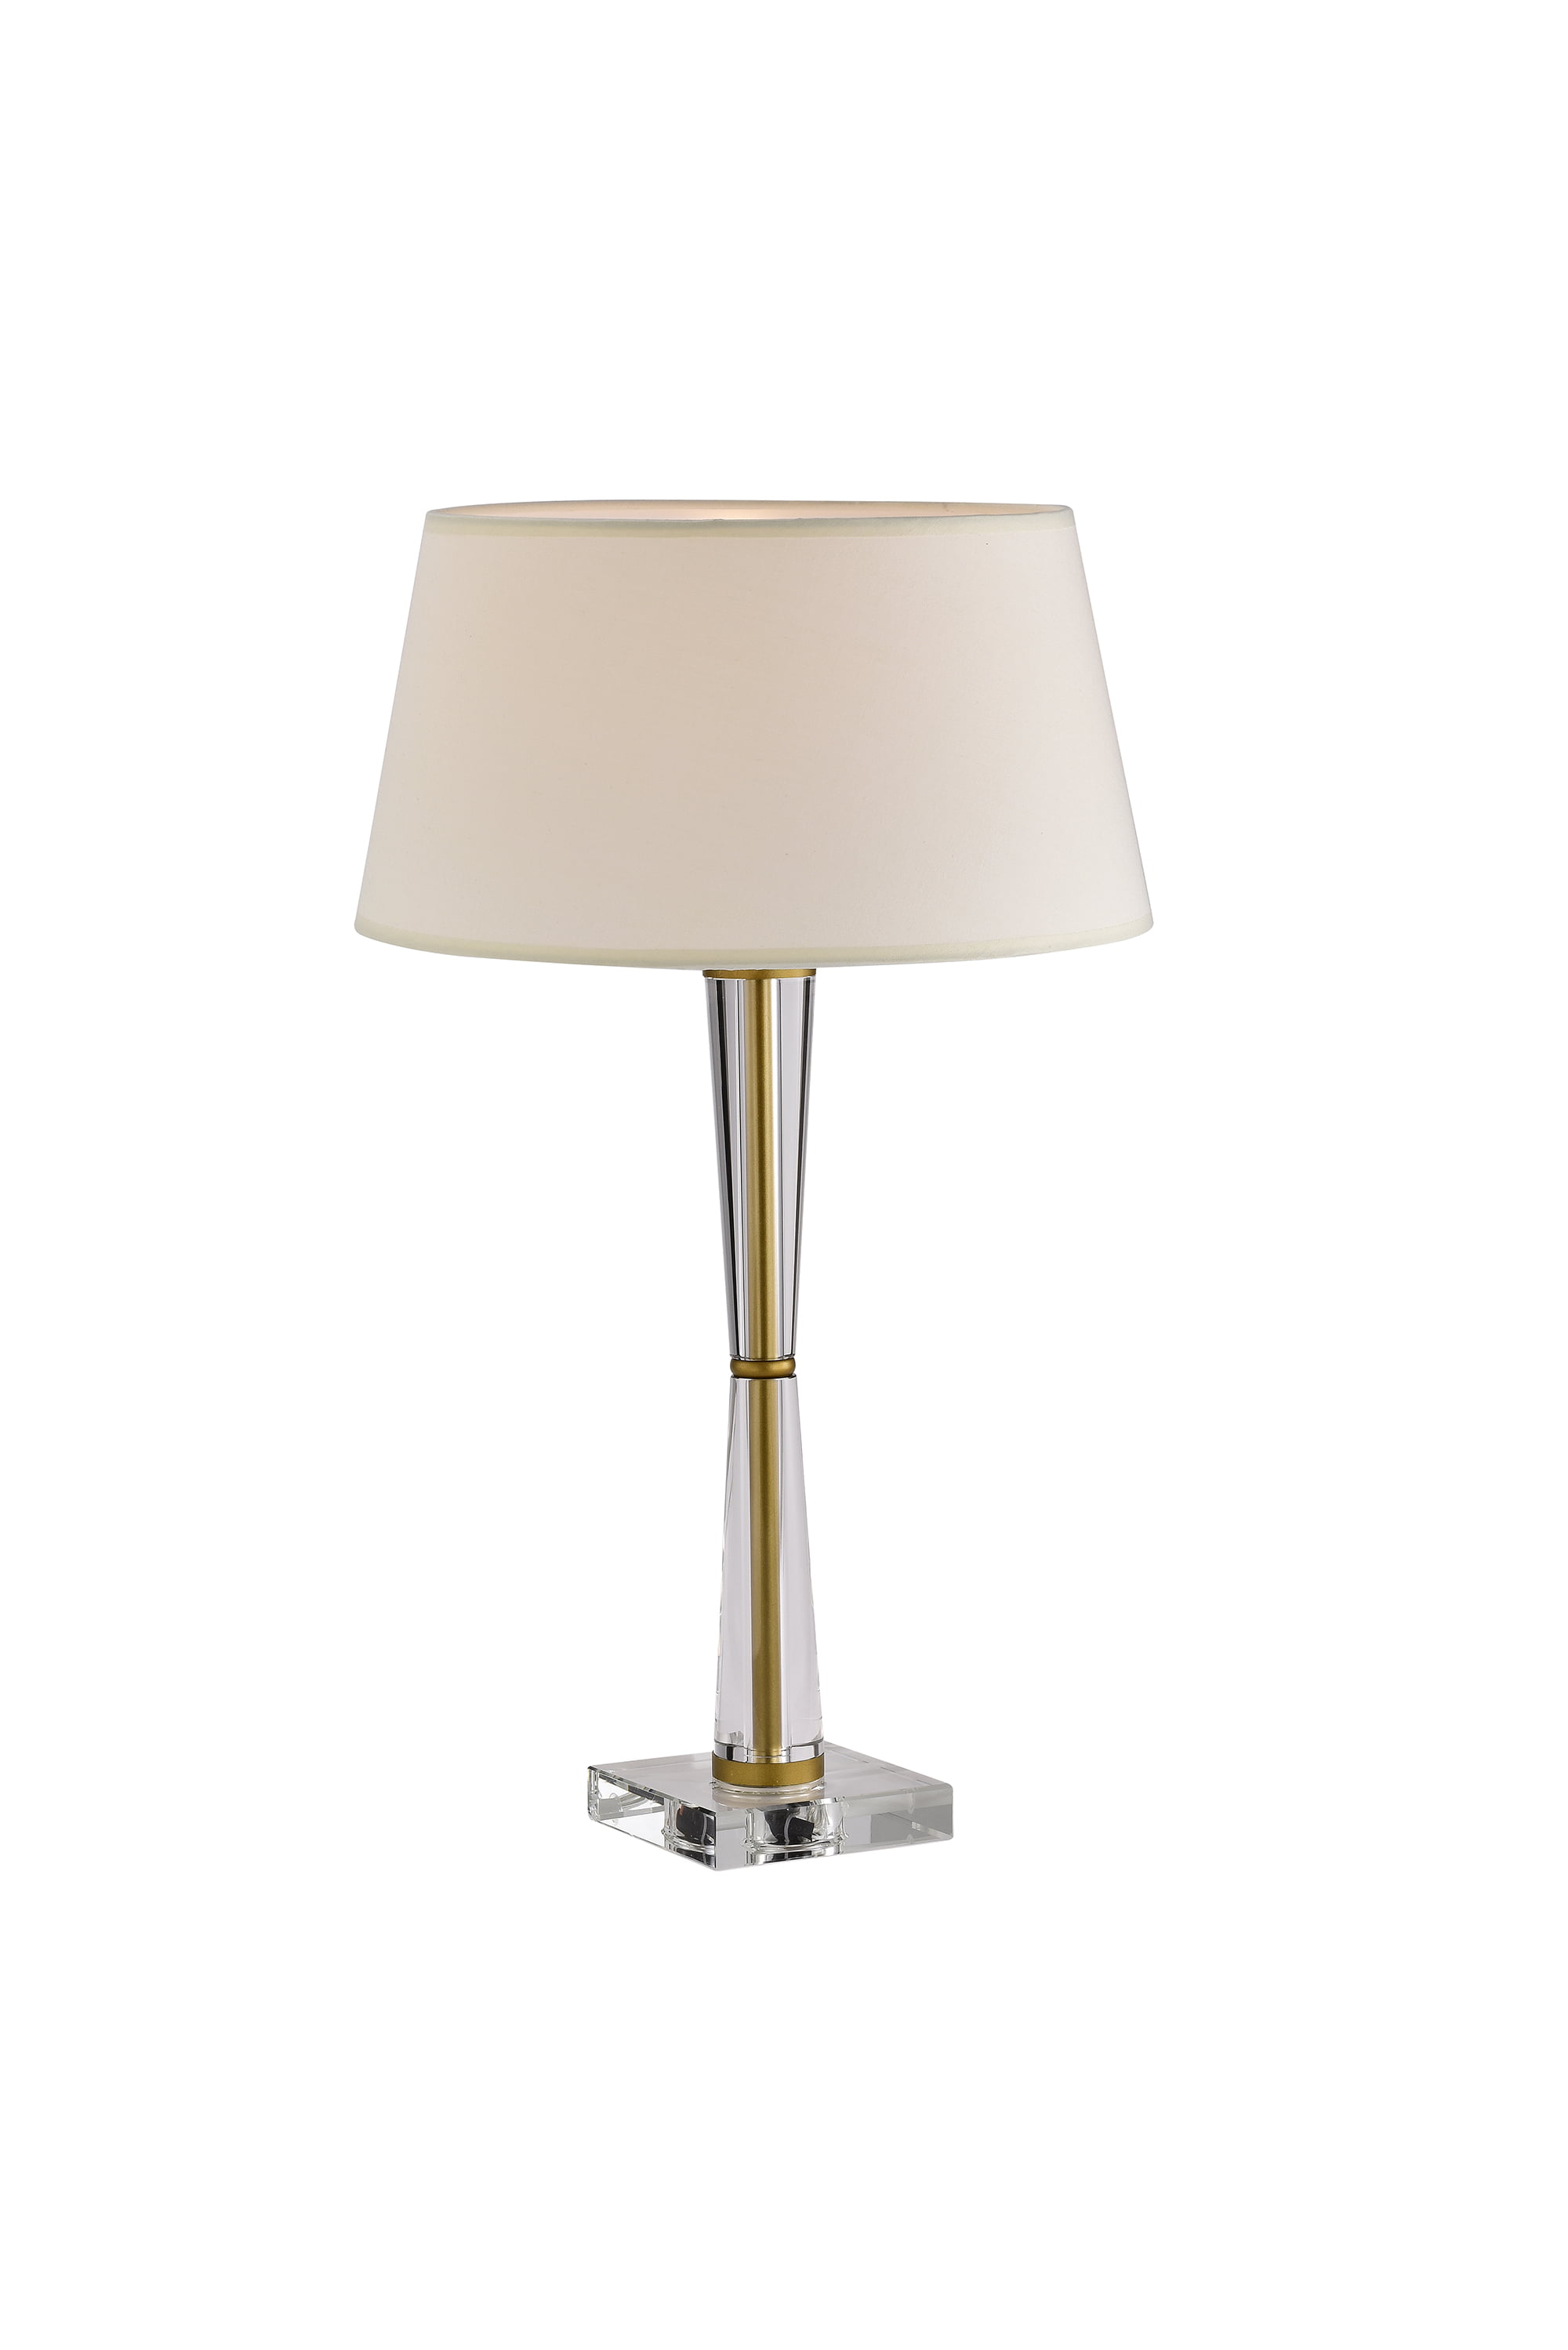 Swanson Off-White+Matte Gold 1-Light Metal/Fabric Drum Shade Table Lamp